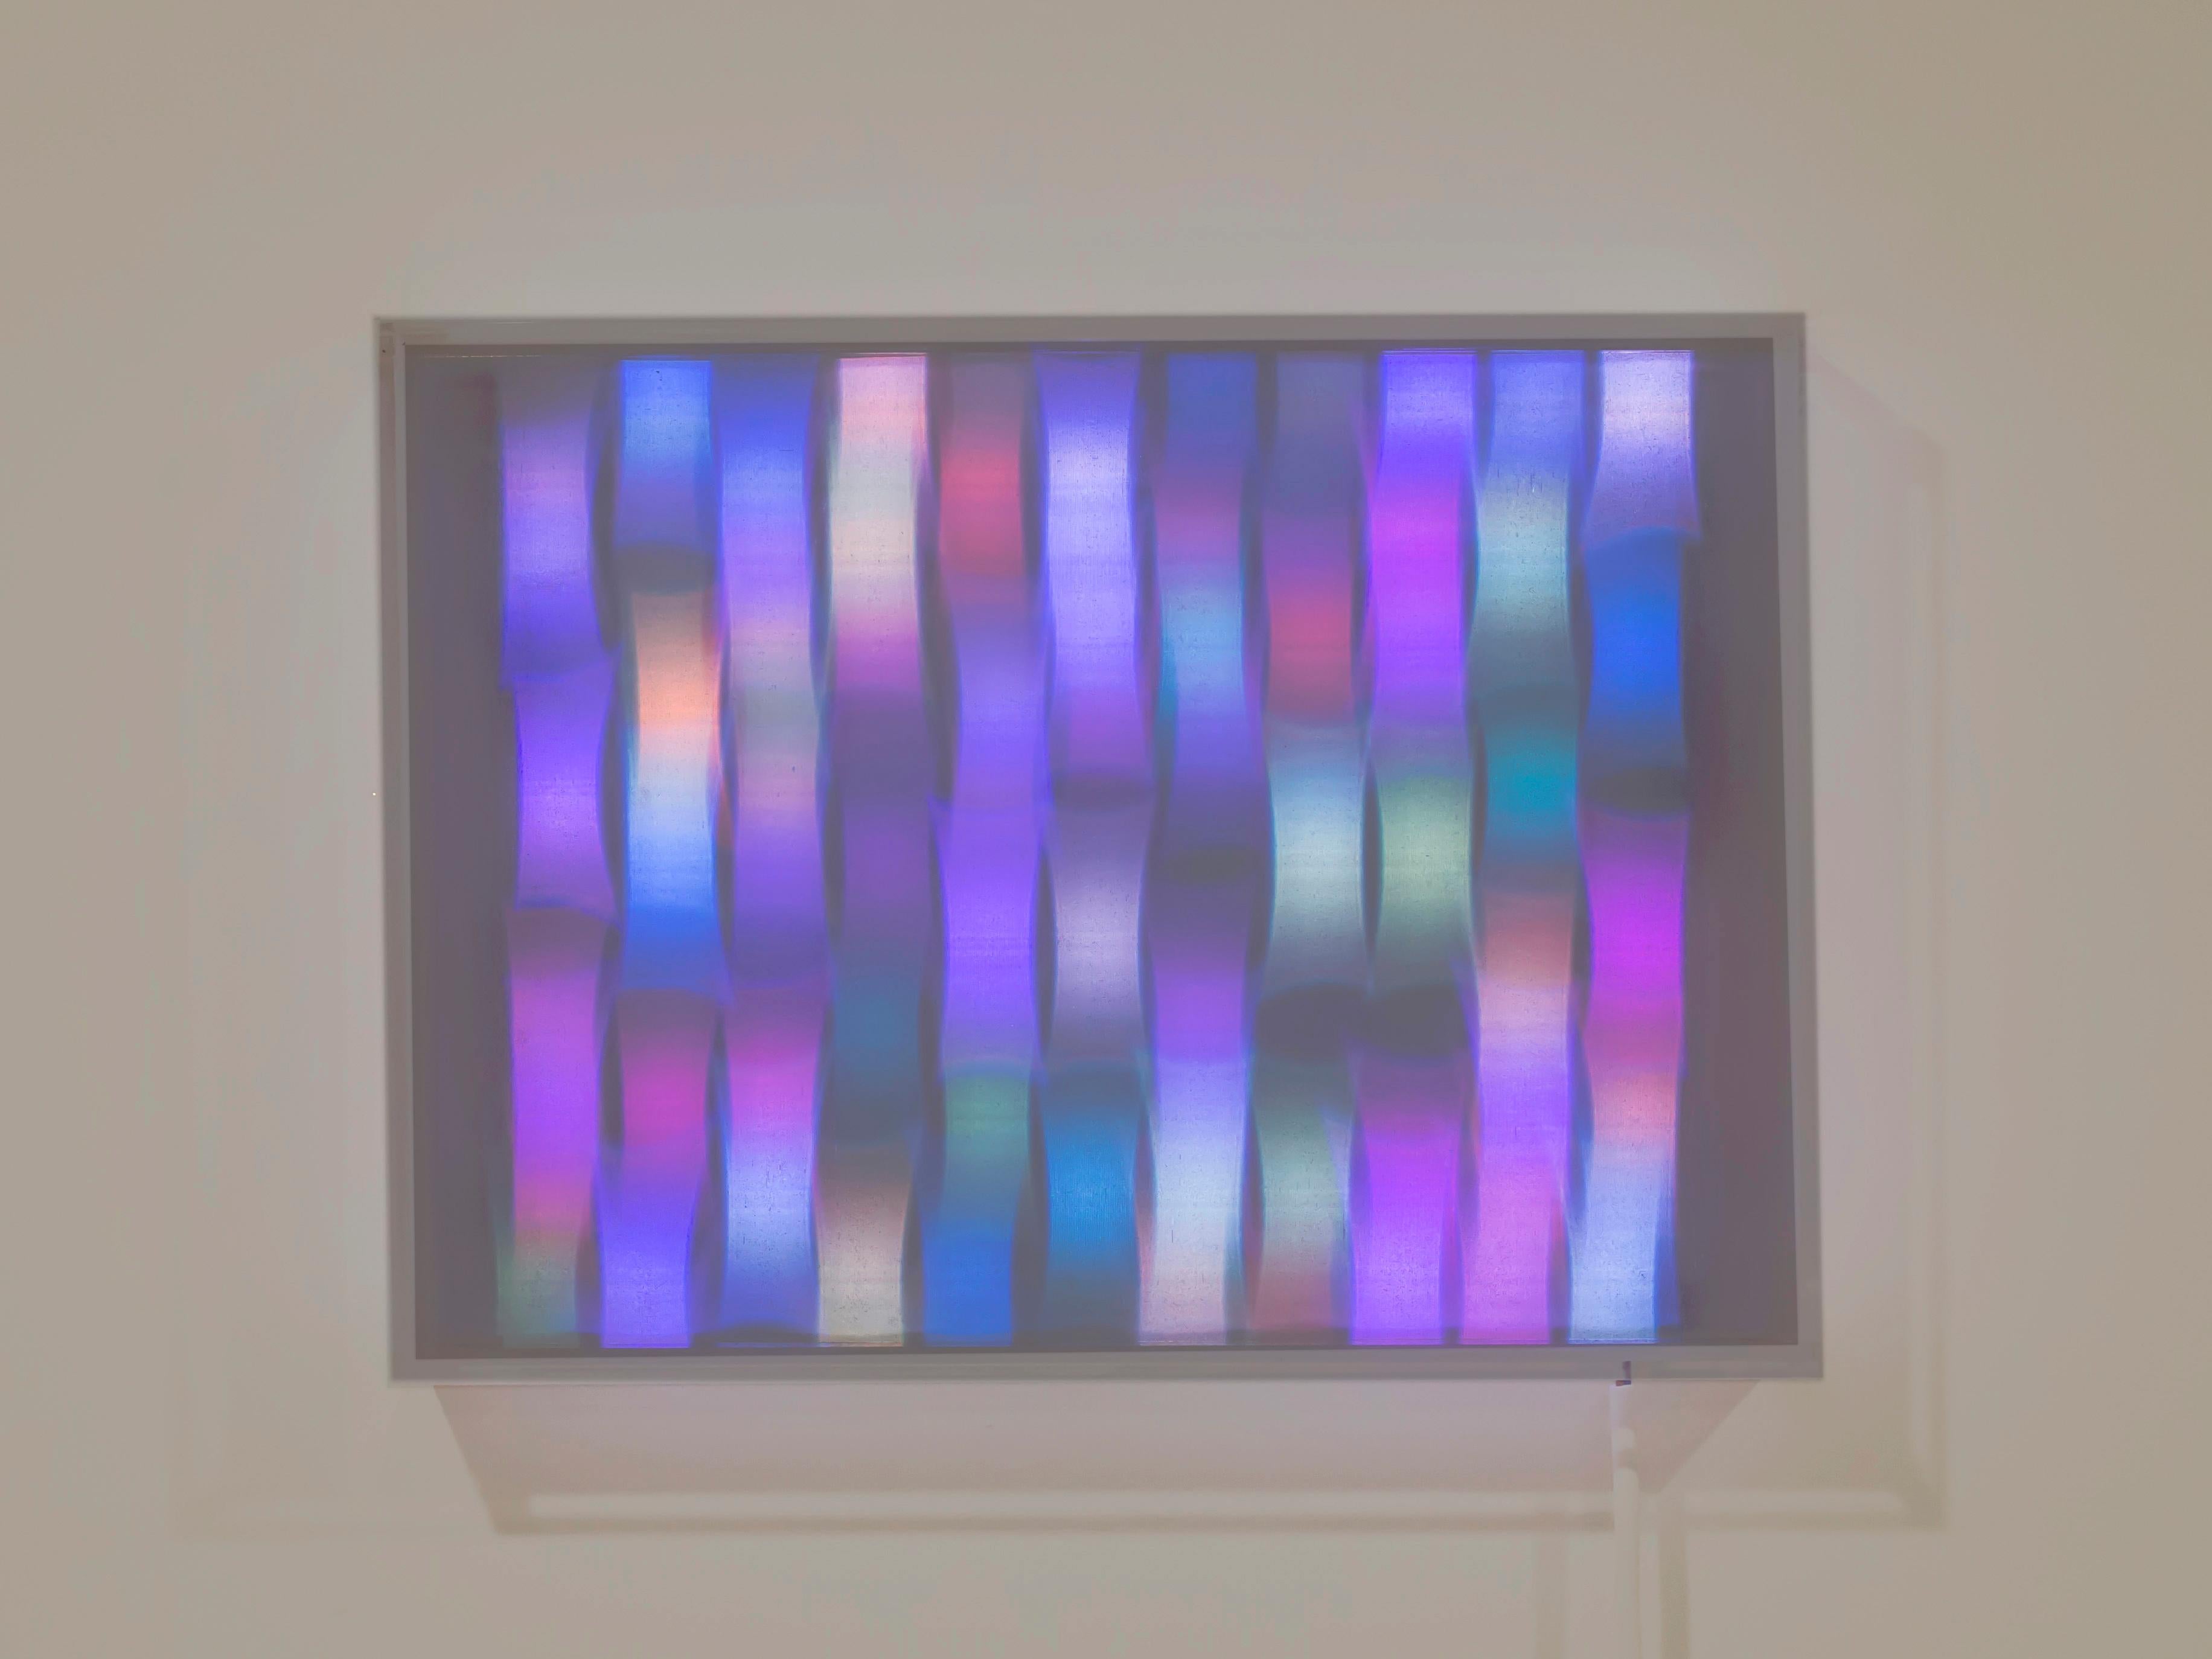 Ebb and Flow - Vertical Blur, LED Enabled Wall Art, 2021 - Mixed Media Art by Jasmine Pilcher